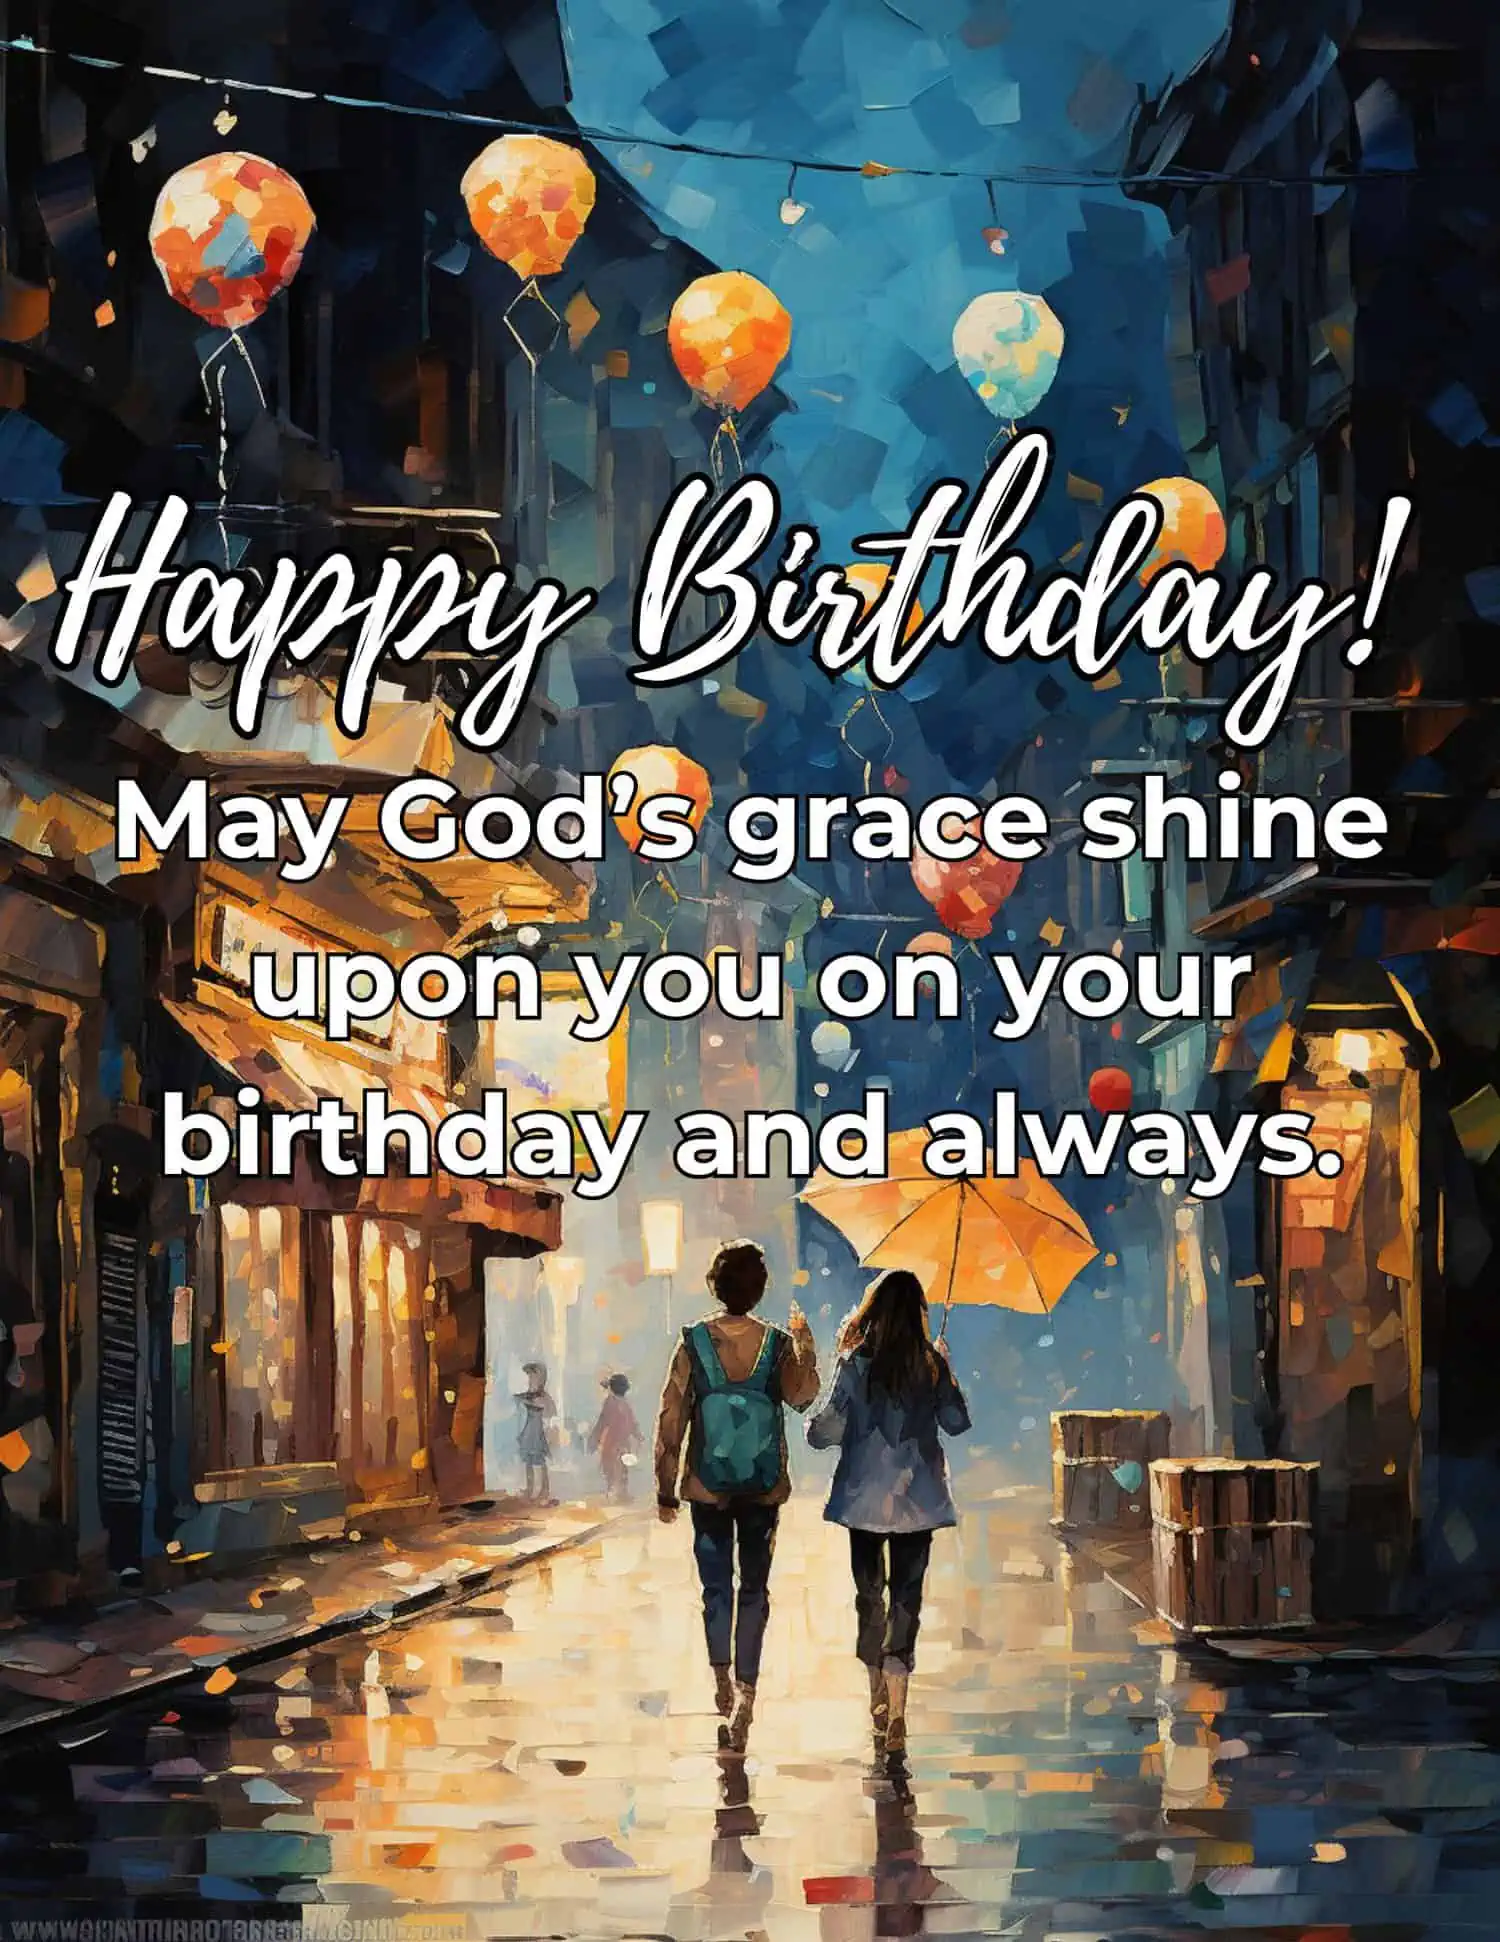 Express your heartfelt prayers and blessings with these religious birthday greetings, perfectly combining faith and the deep bond of friendship for your best friend's special day.